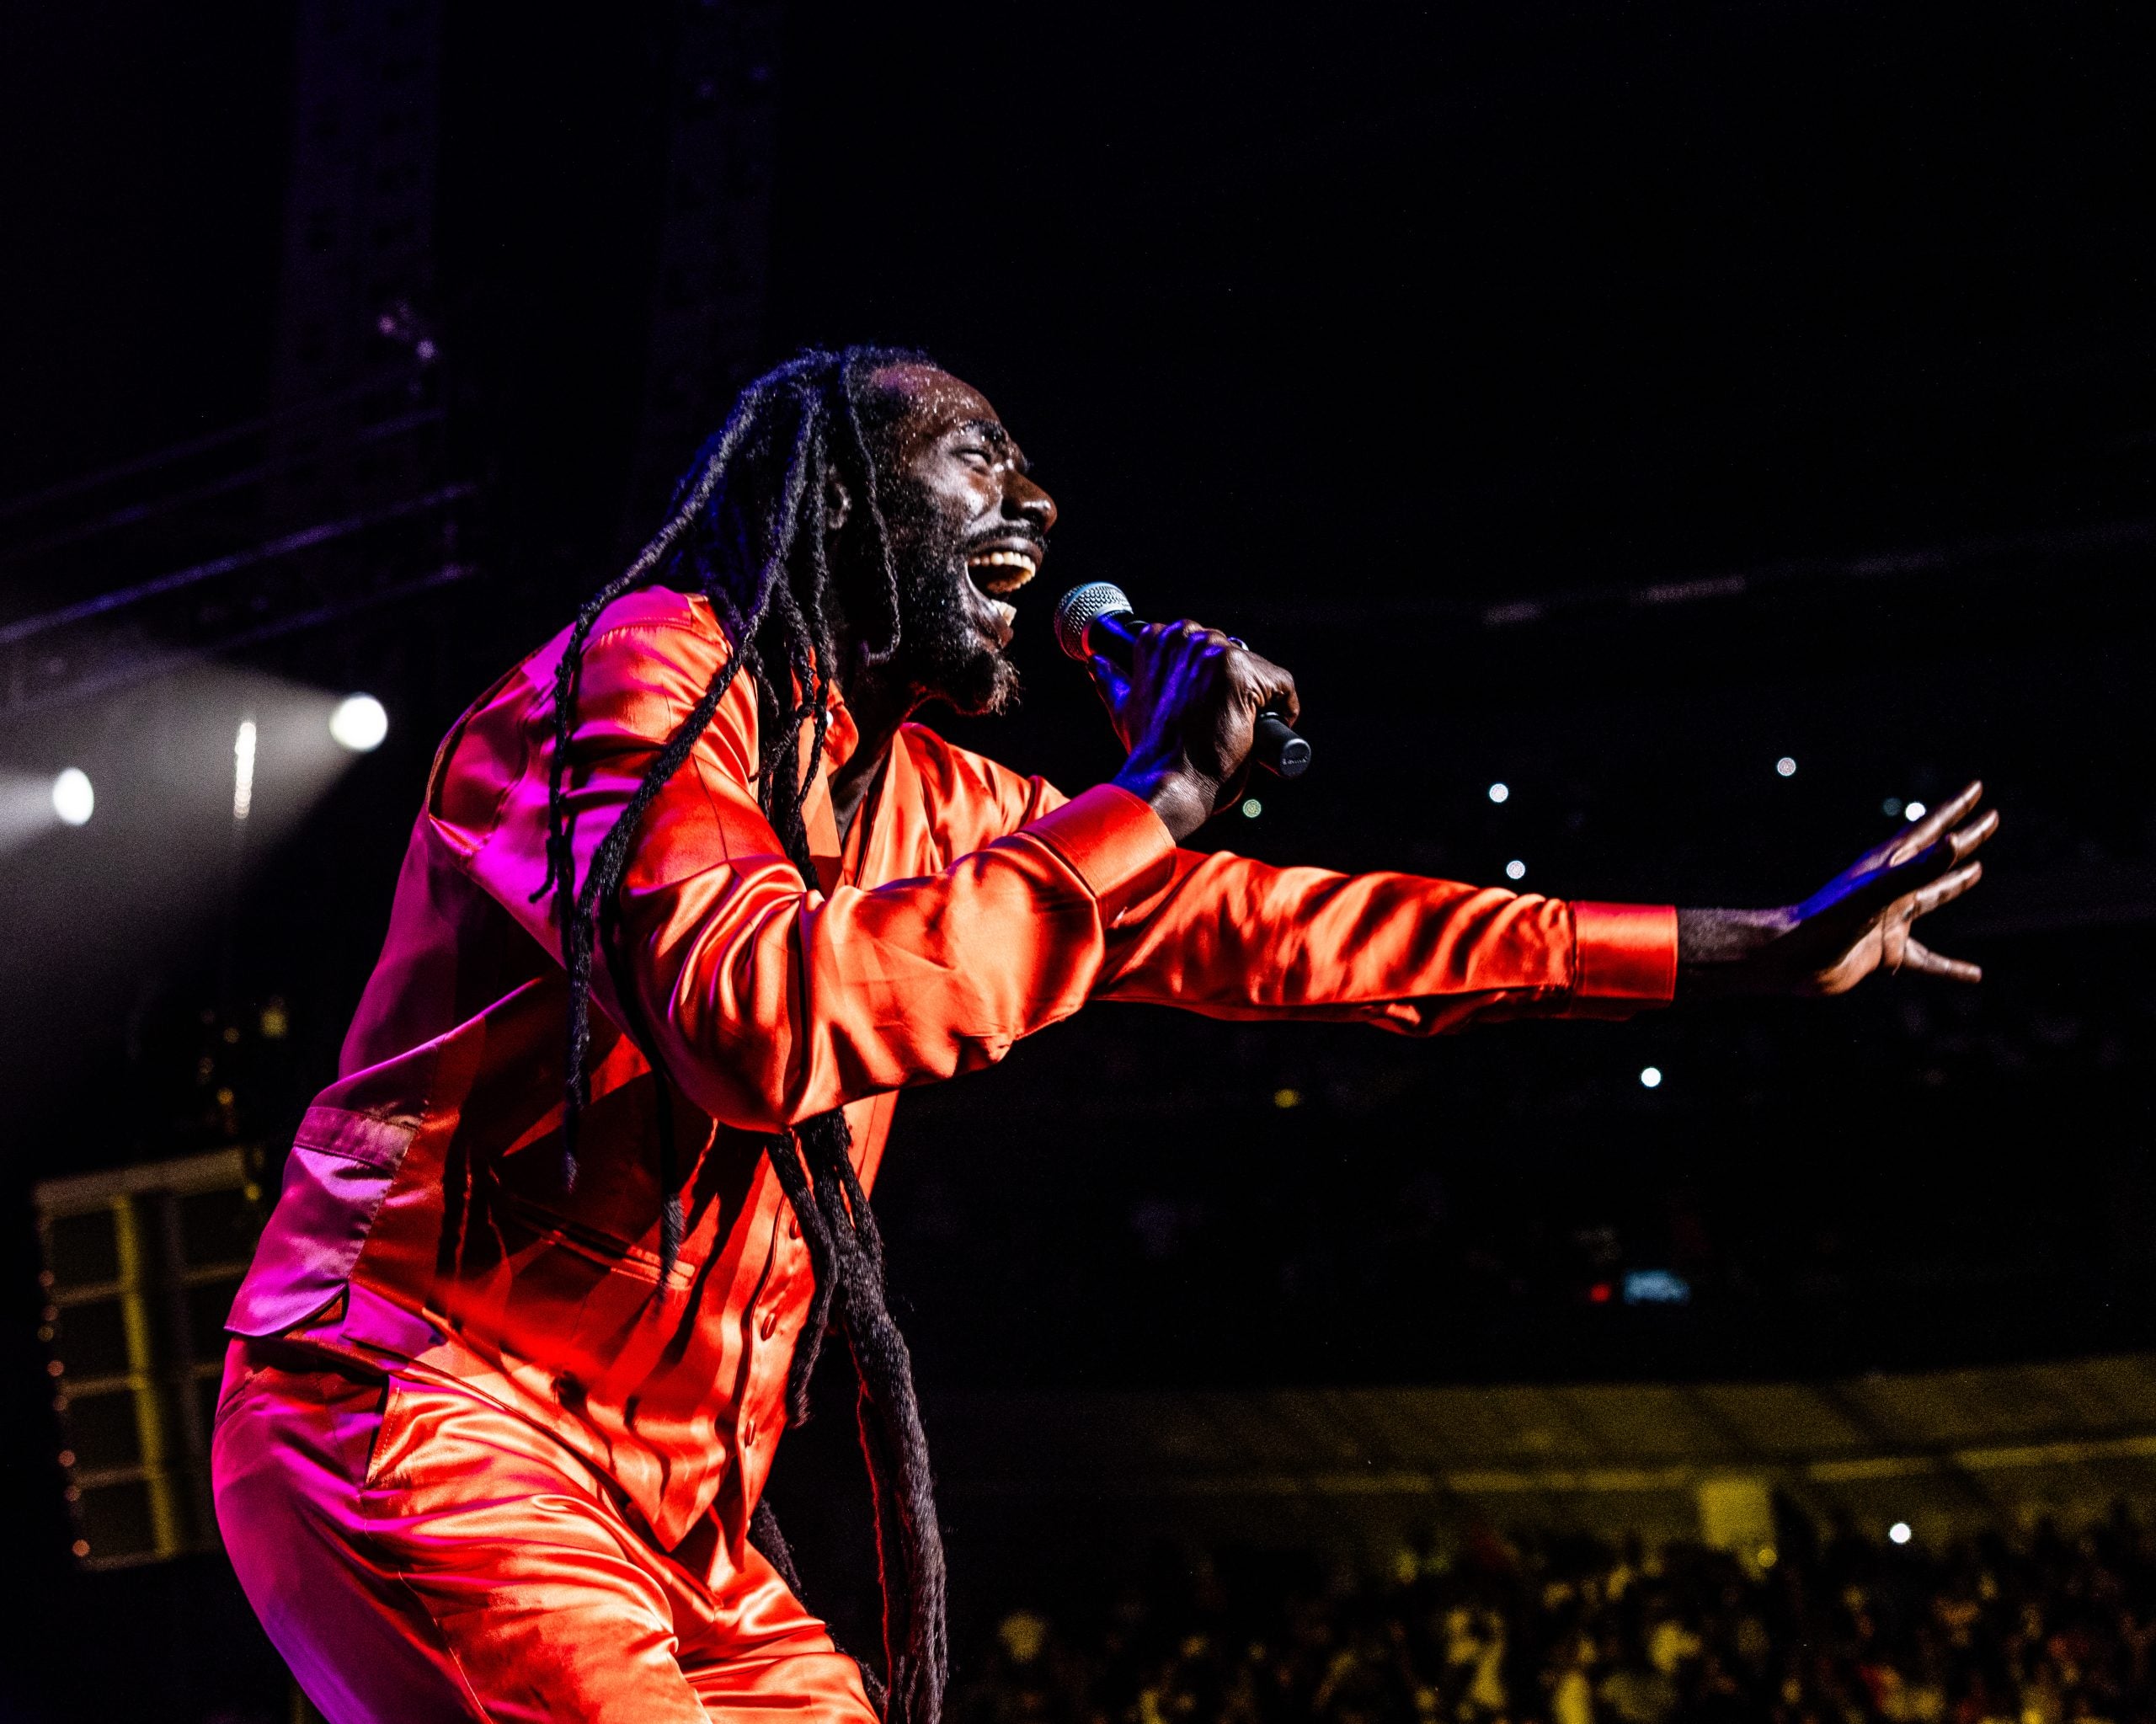 Buju Banton Makes Triumphant Return To U.S. Stage With “Long Walk To Freedom” Concerts. Check Out The Top Moments